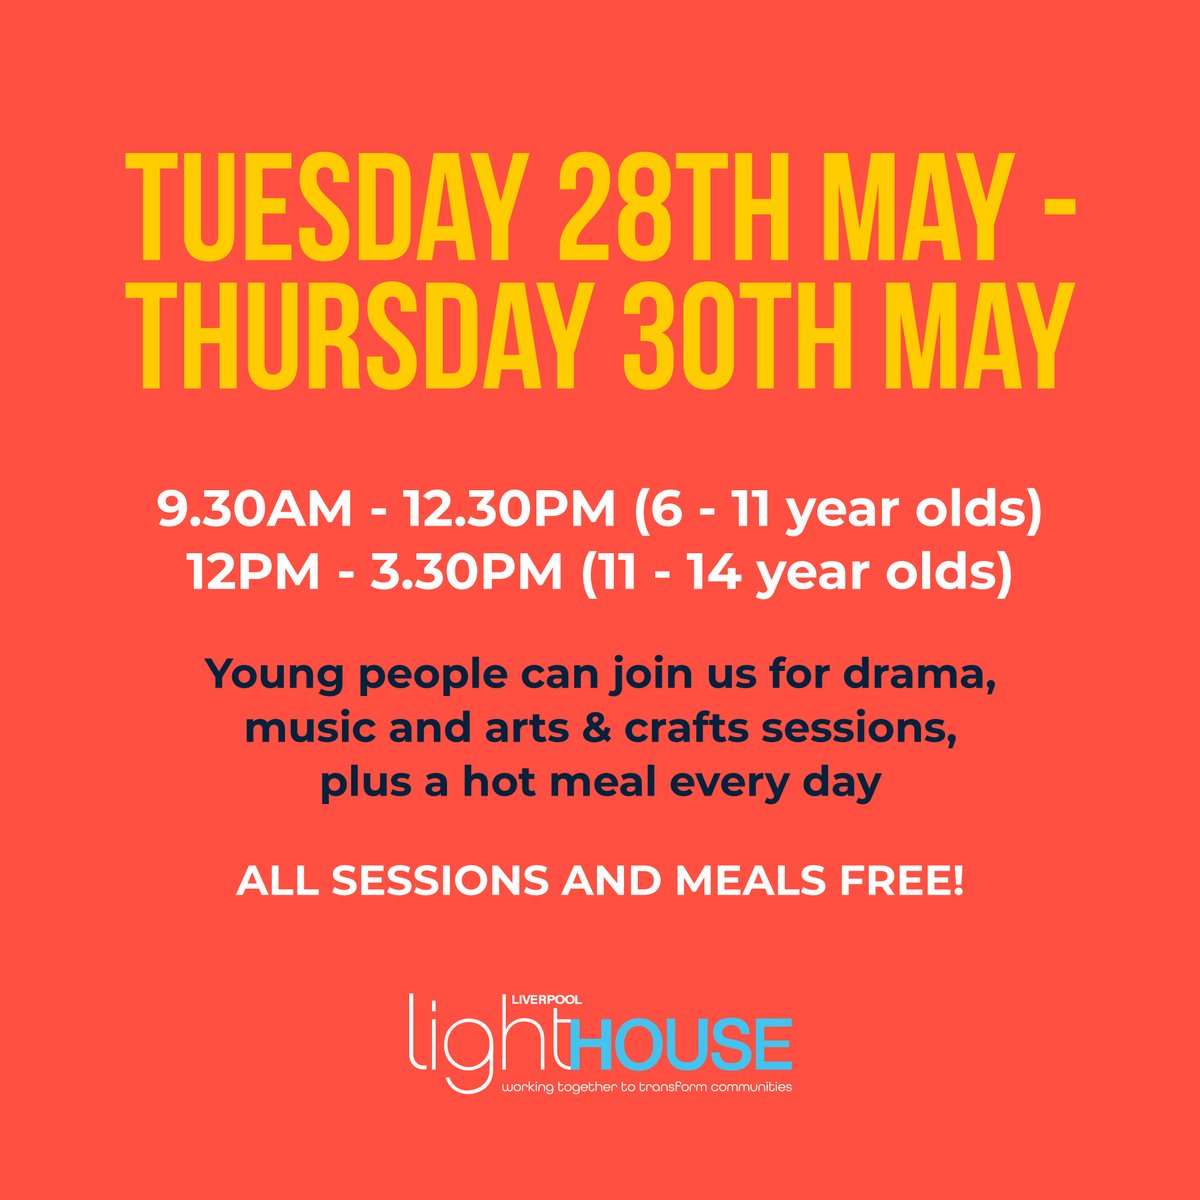 Next week we are opening up our doors for our May Half-Term Holiday Club! ⛱️ Young people aged 6-14 can join us for drama, music and arts and crafts sessions! Email kelsey.Cullen@liverpoollighthouse.com to sign up! SHARE this post with someone who needs to see it!